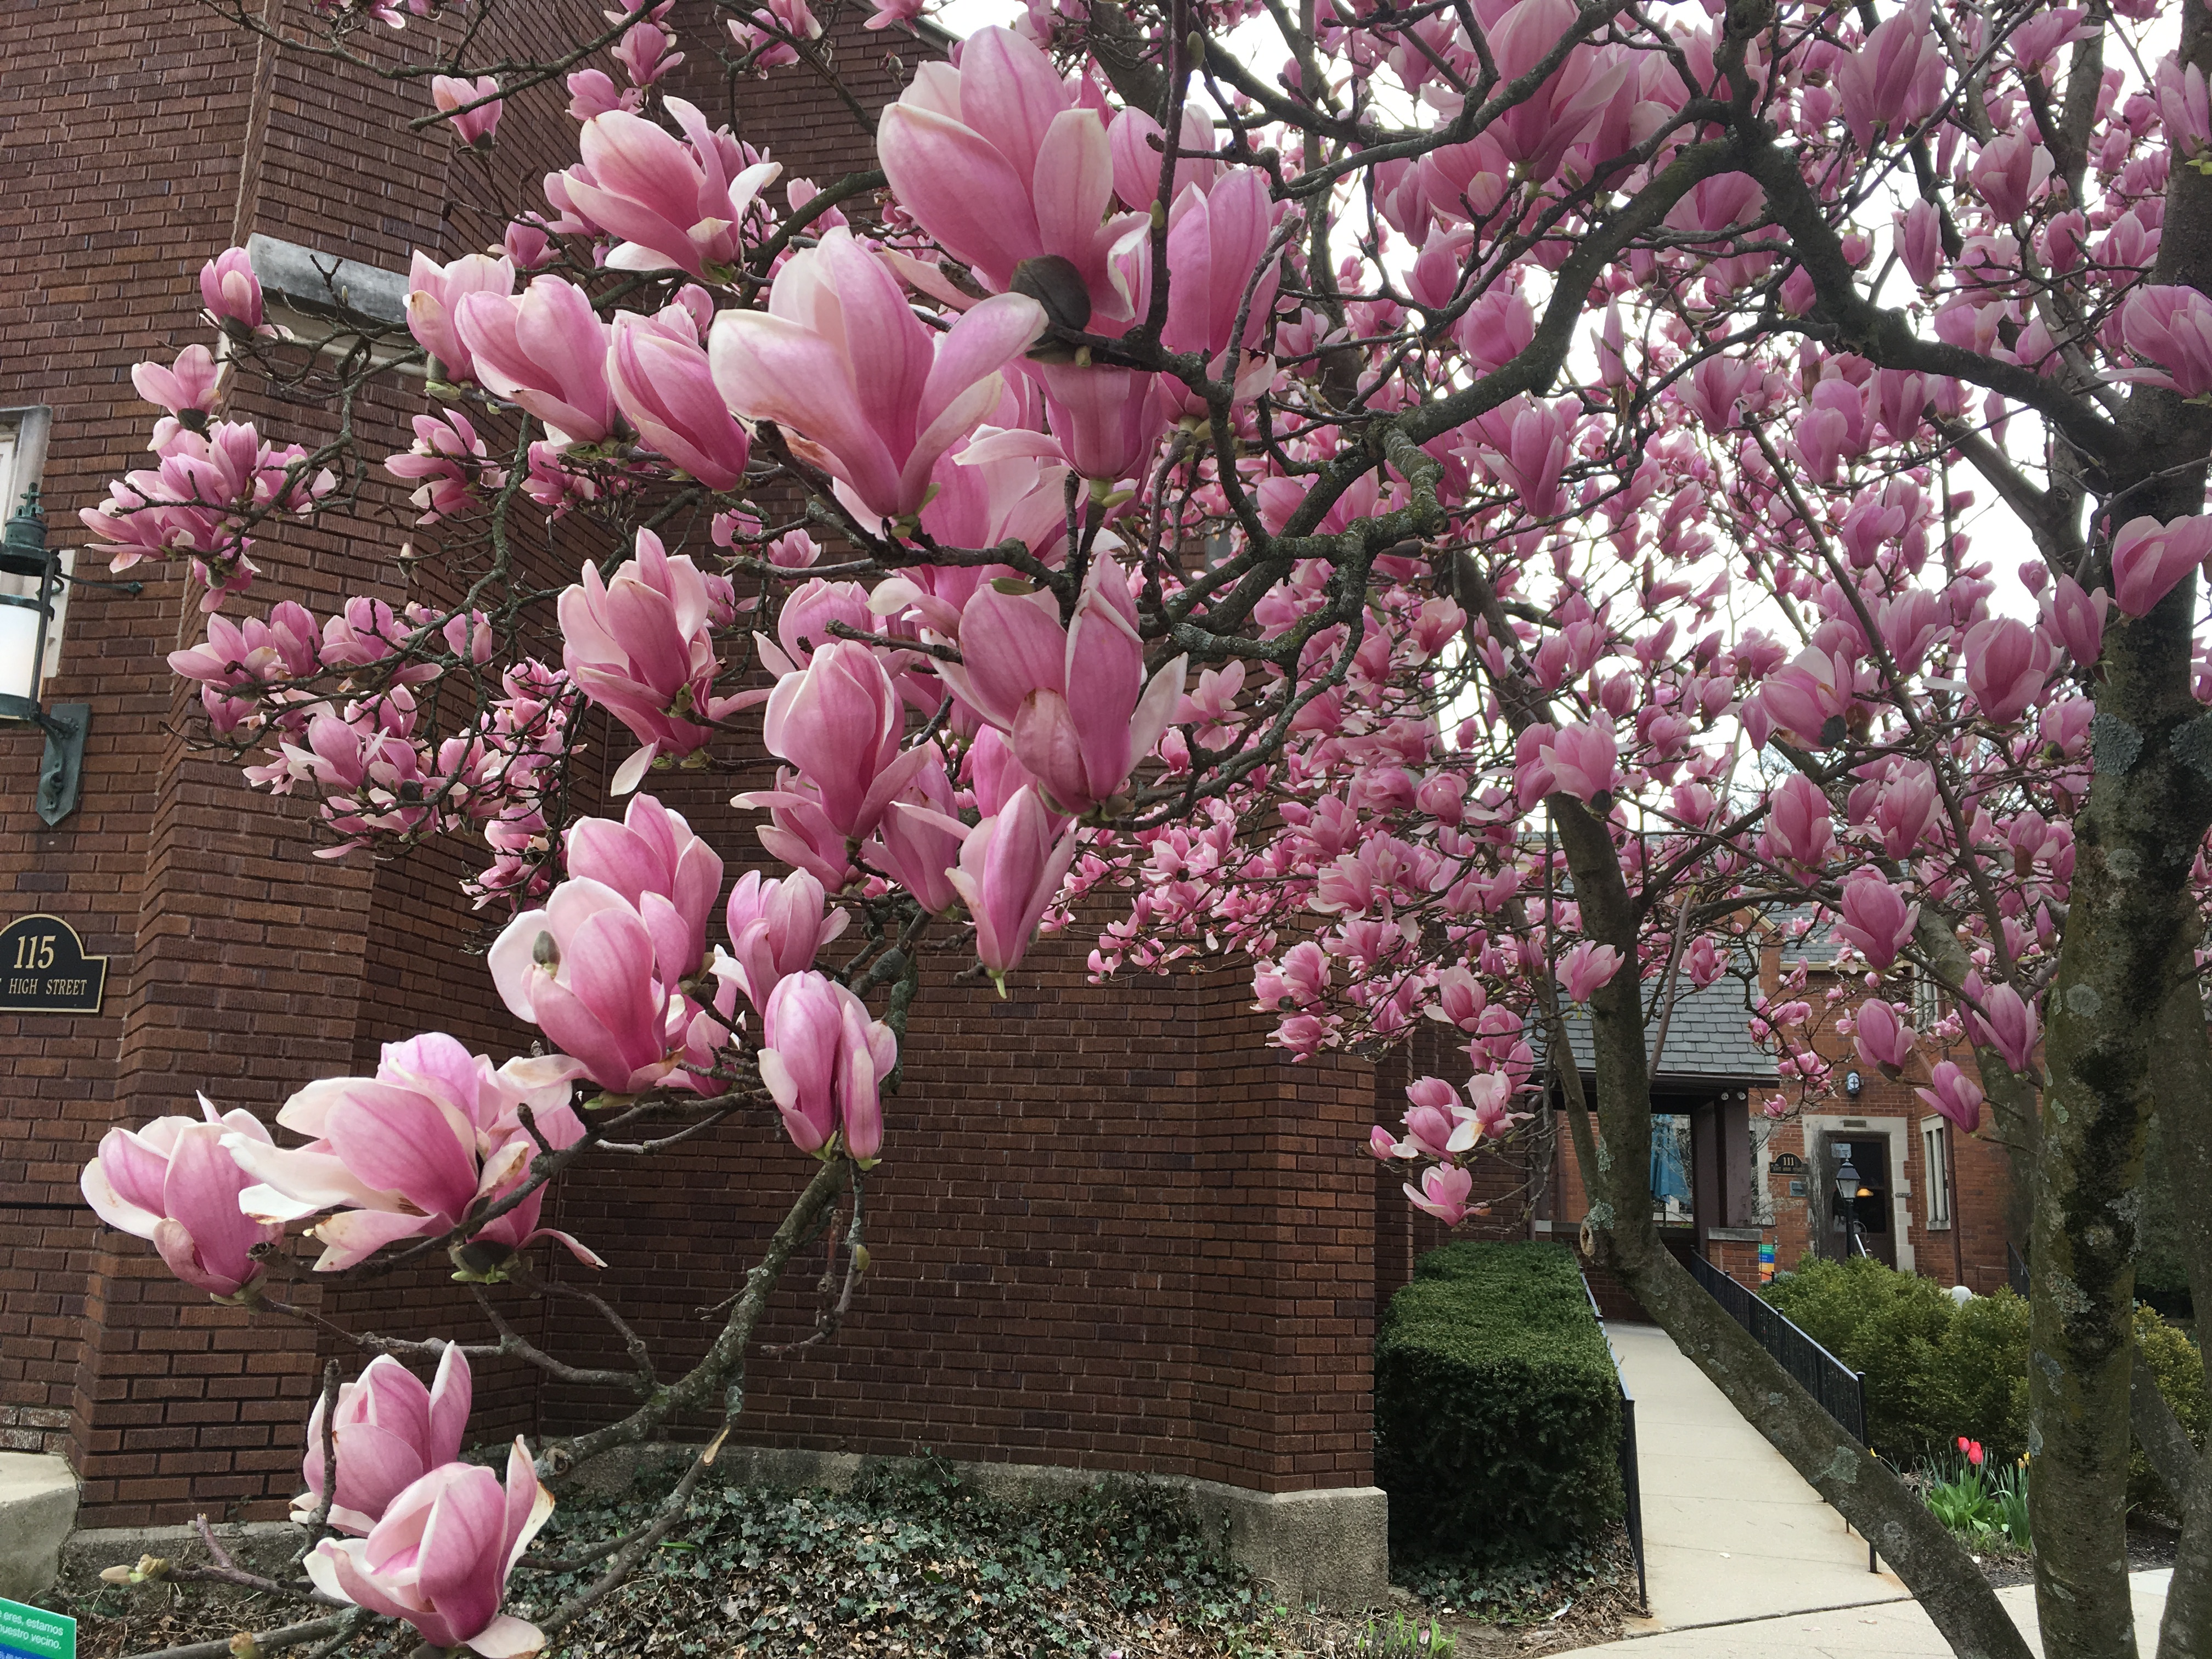 Magnolia tree in full bloom with pink flowers